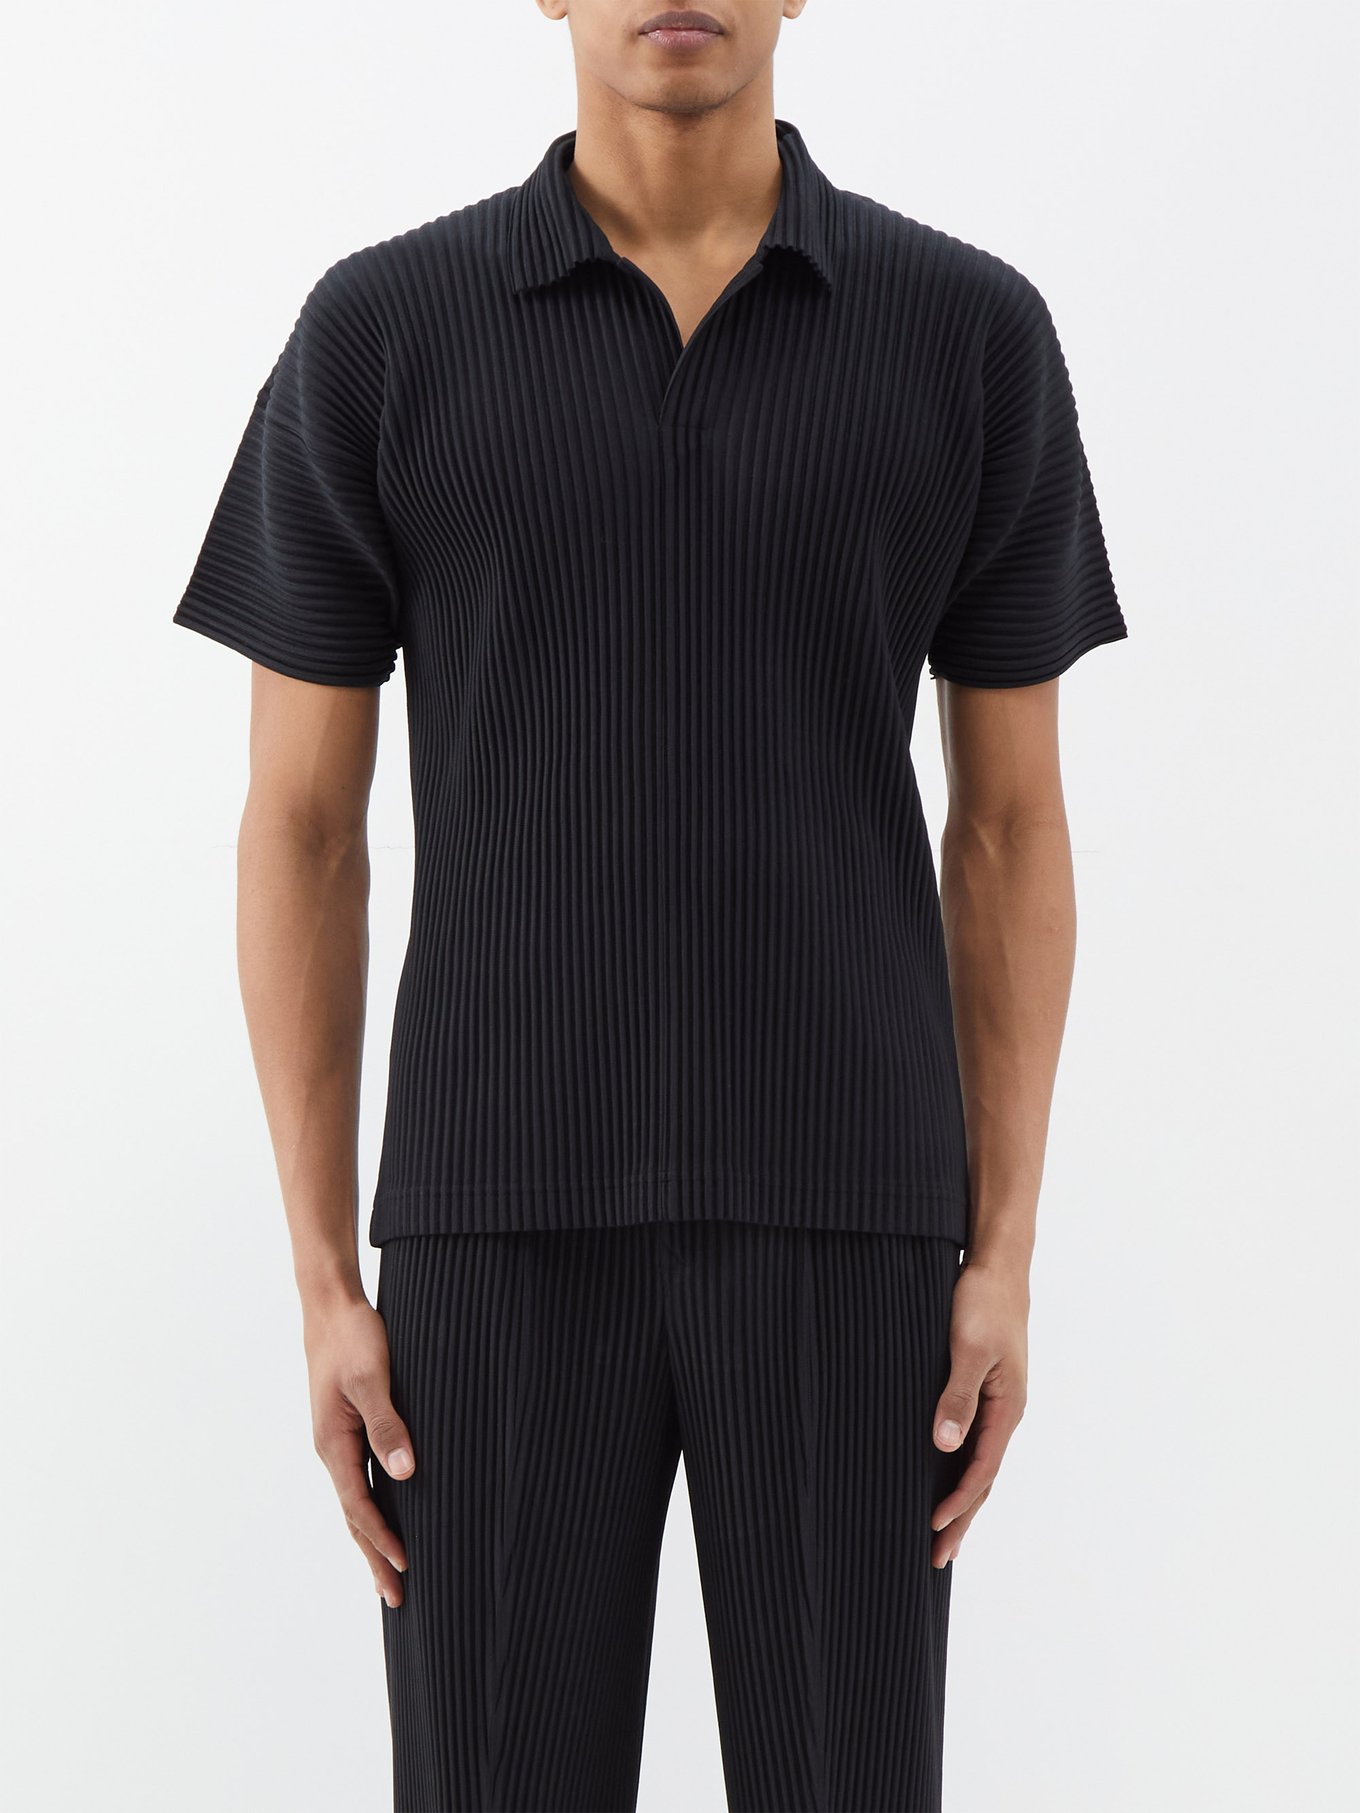 HOMME PLISSÉ ISSEY MIYAKE ポロシャツ 評価 - トップス